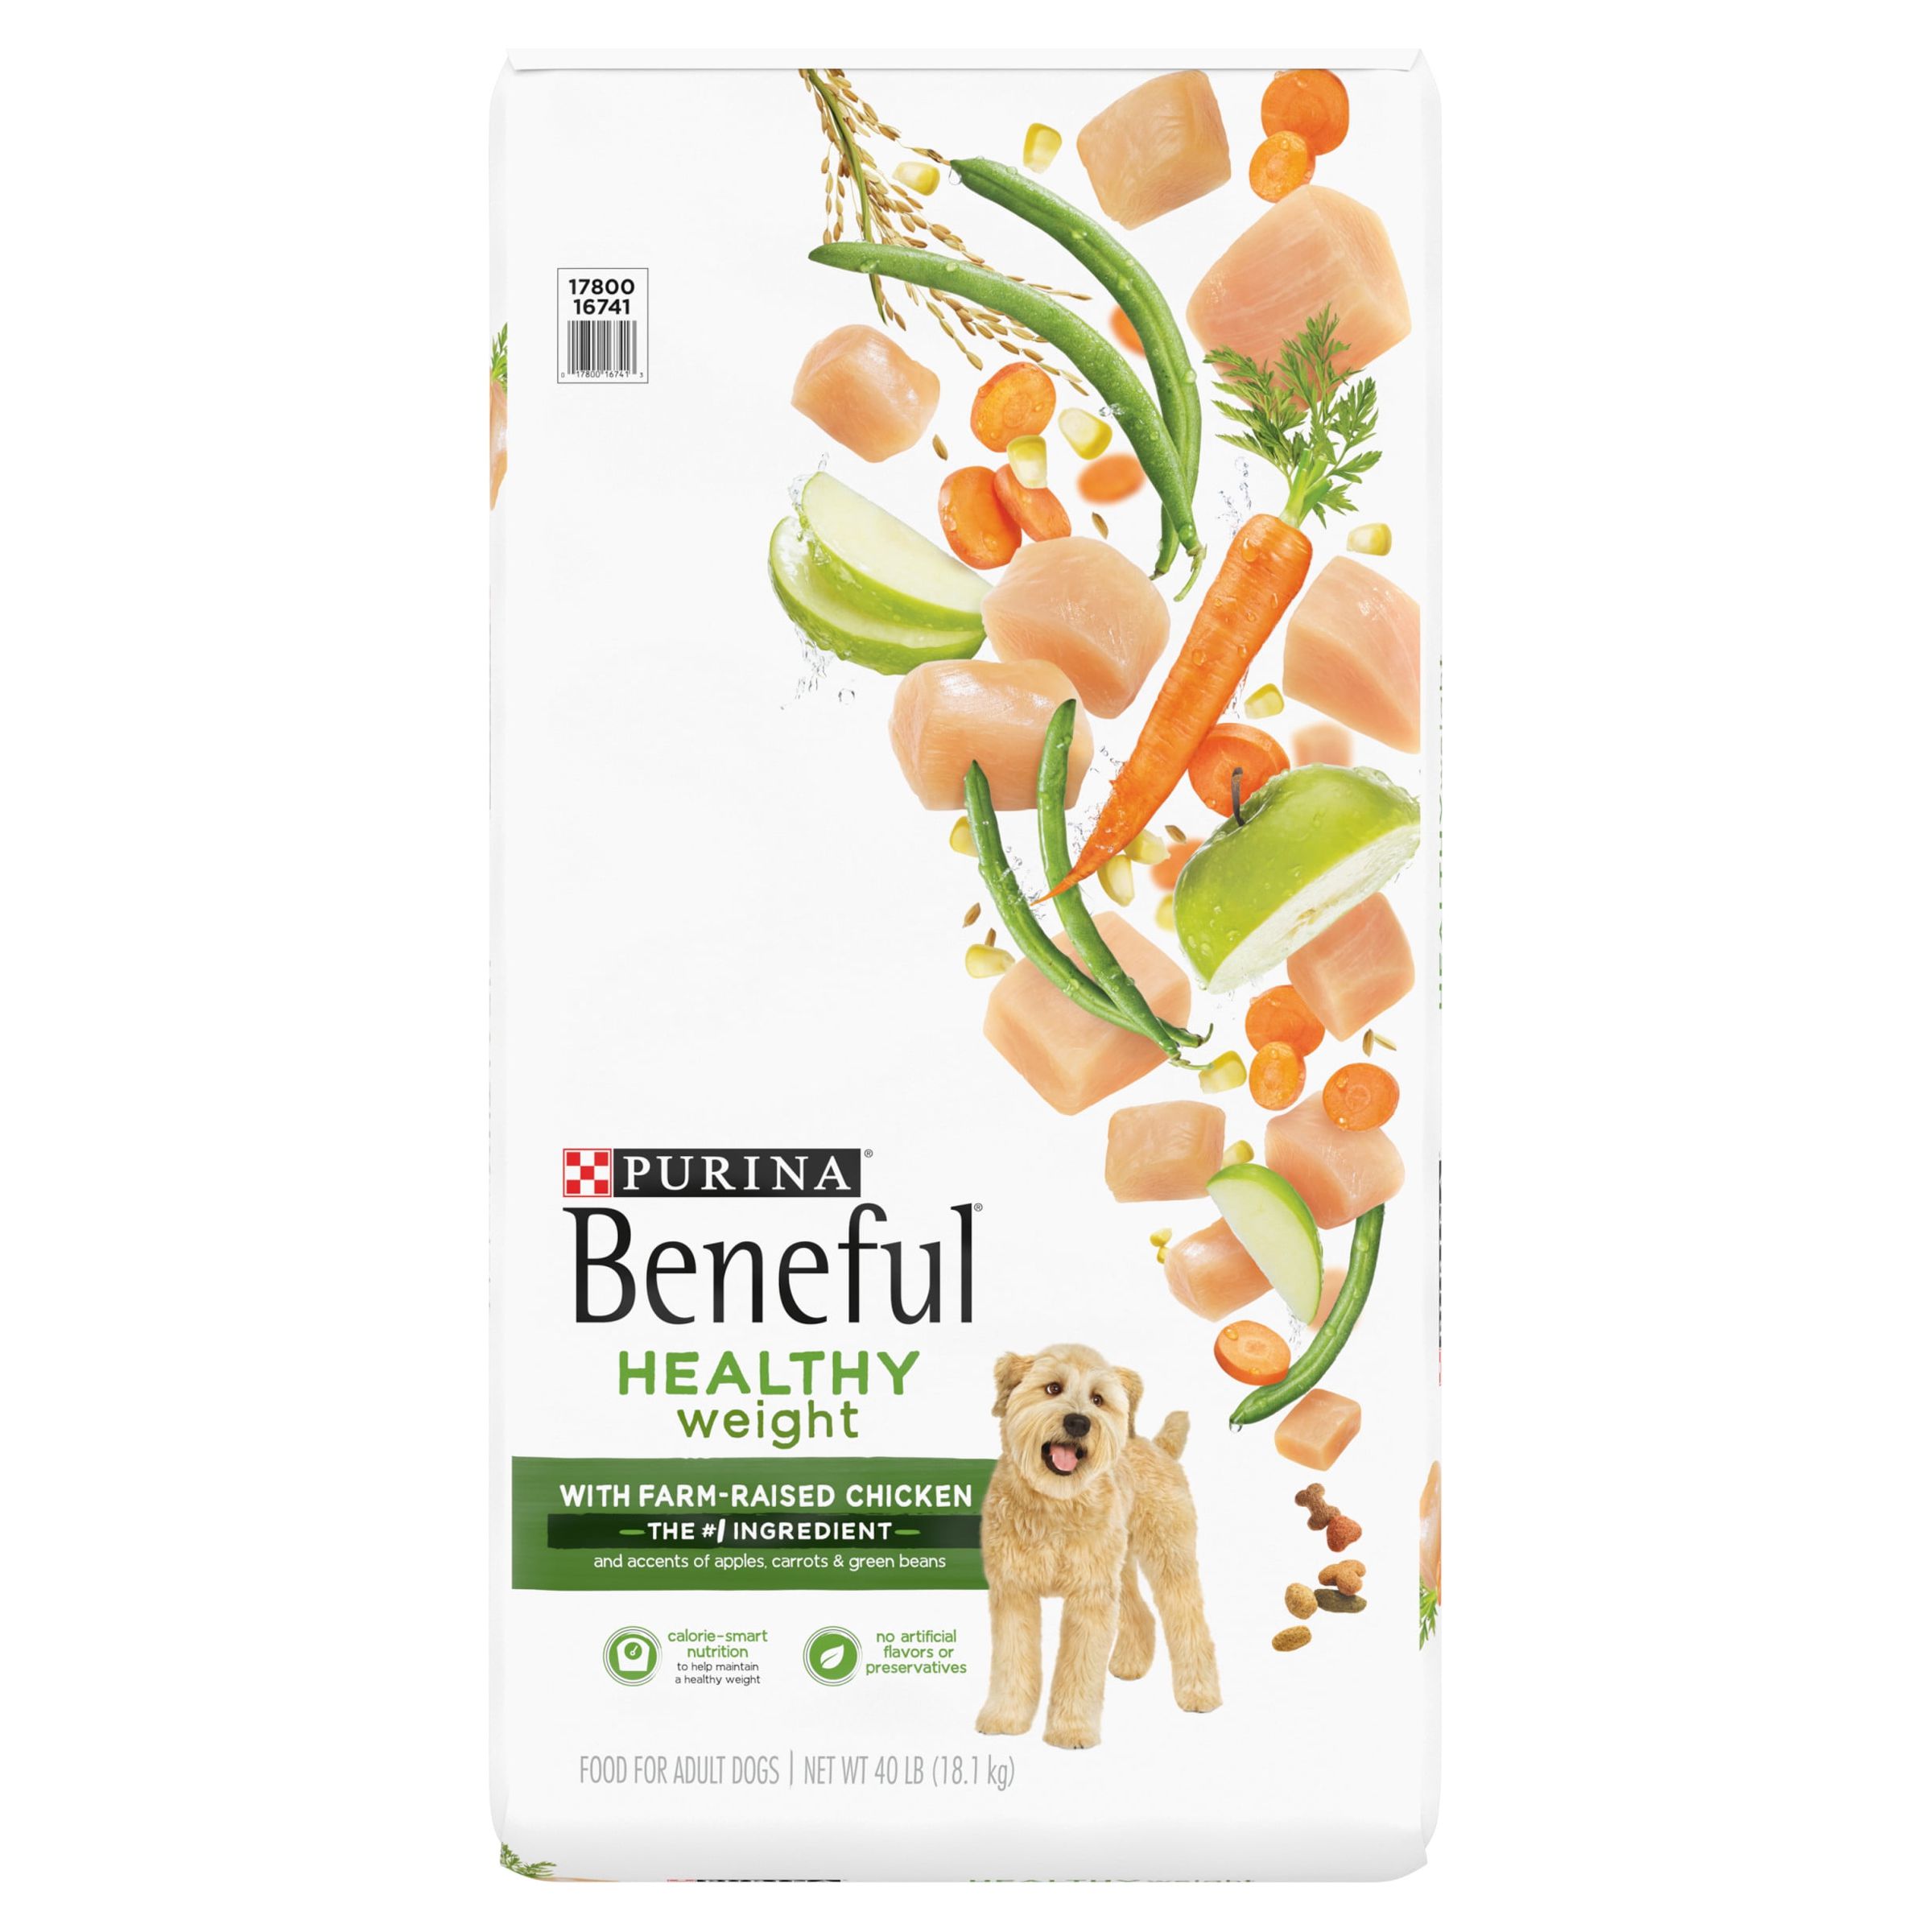 Purina Beneful Healthy Weight Dry Dog Food Farm Raised Chicken, 40 lb Bag - image 1 of 9